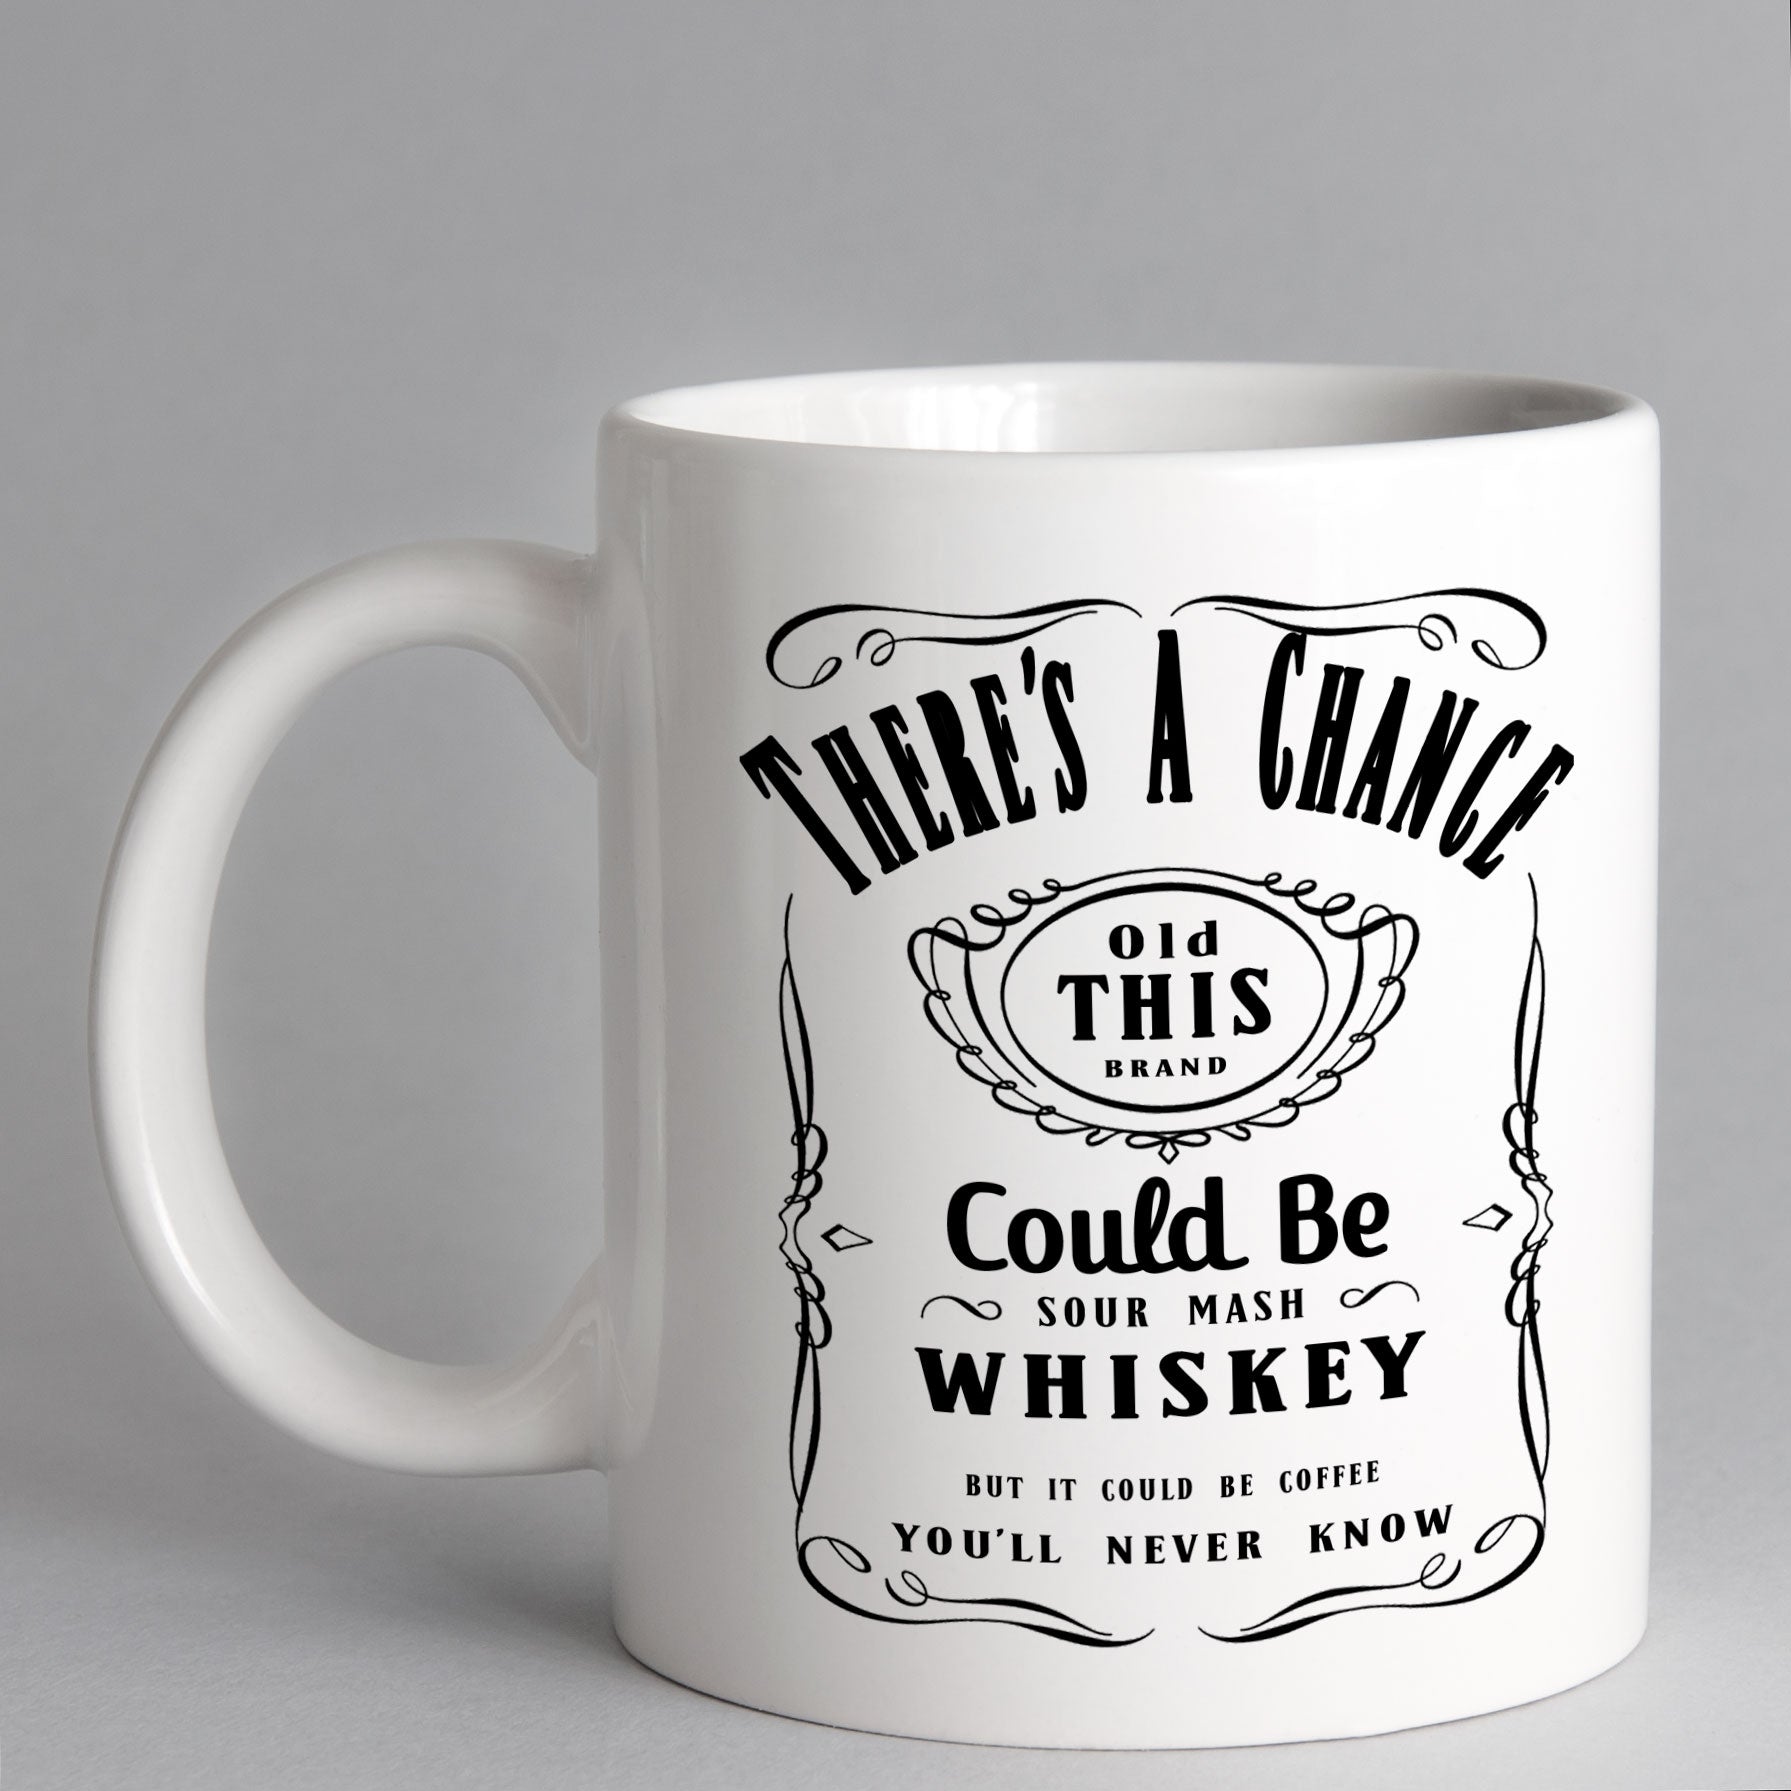 There's A Chance This Could Be Whiskey Mug